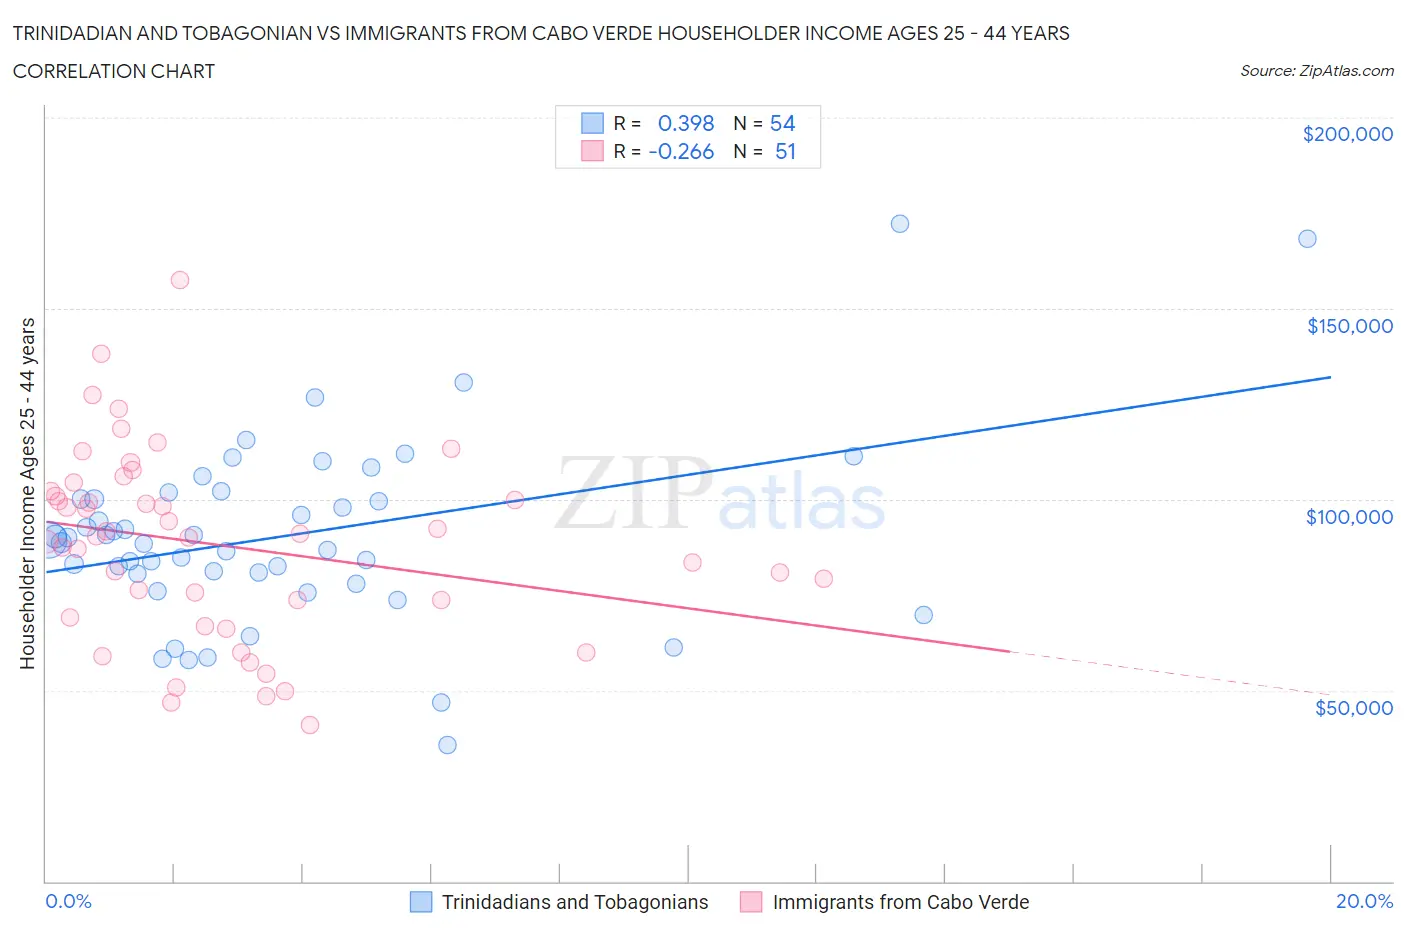 Trinidadian and Tobagonian vs Immigrants from Cabo Verde Householder Income Ages 25 - 44 years